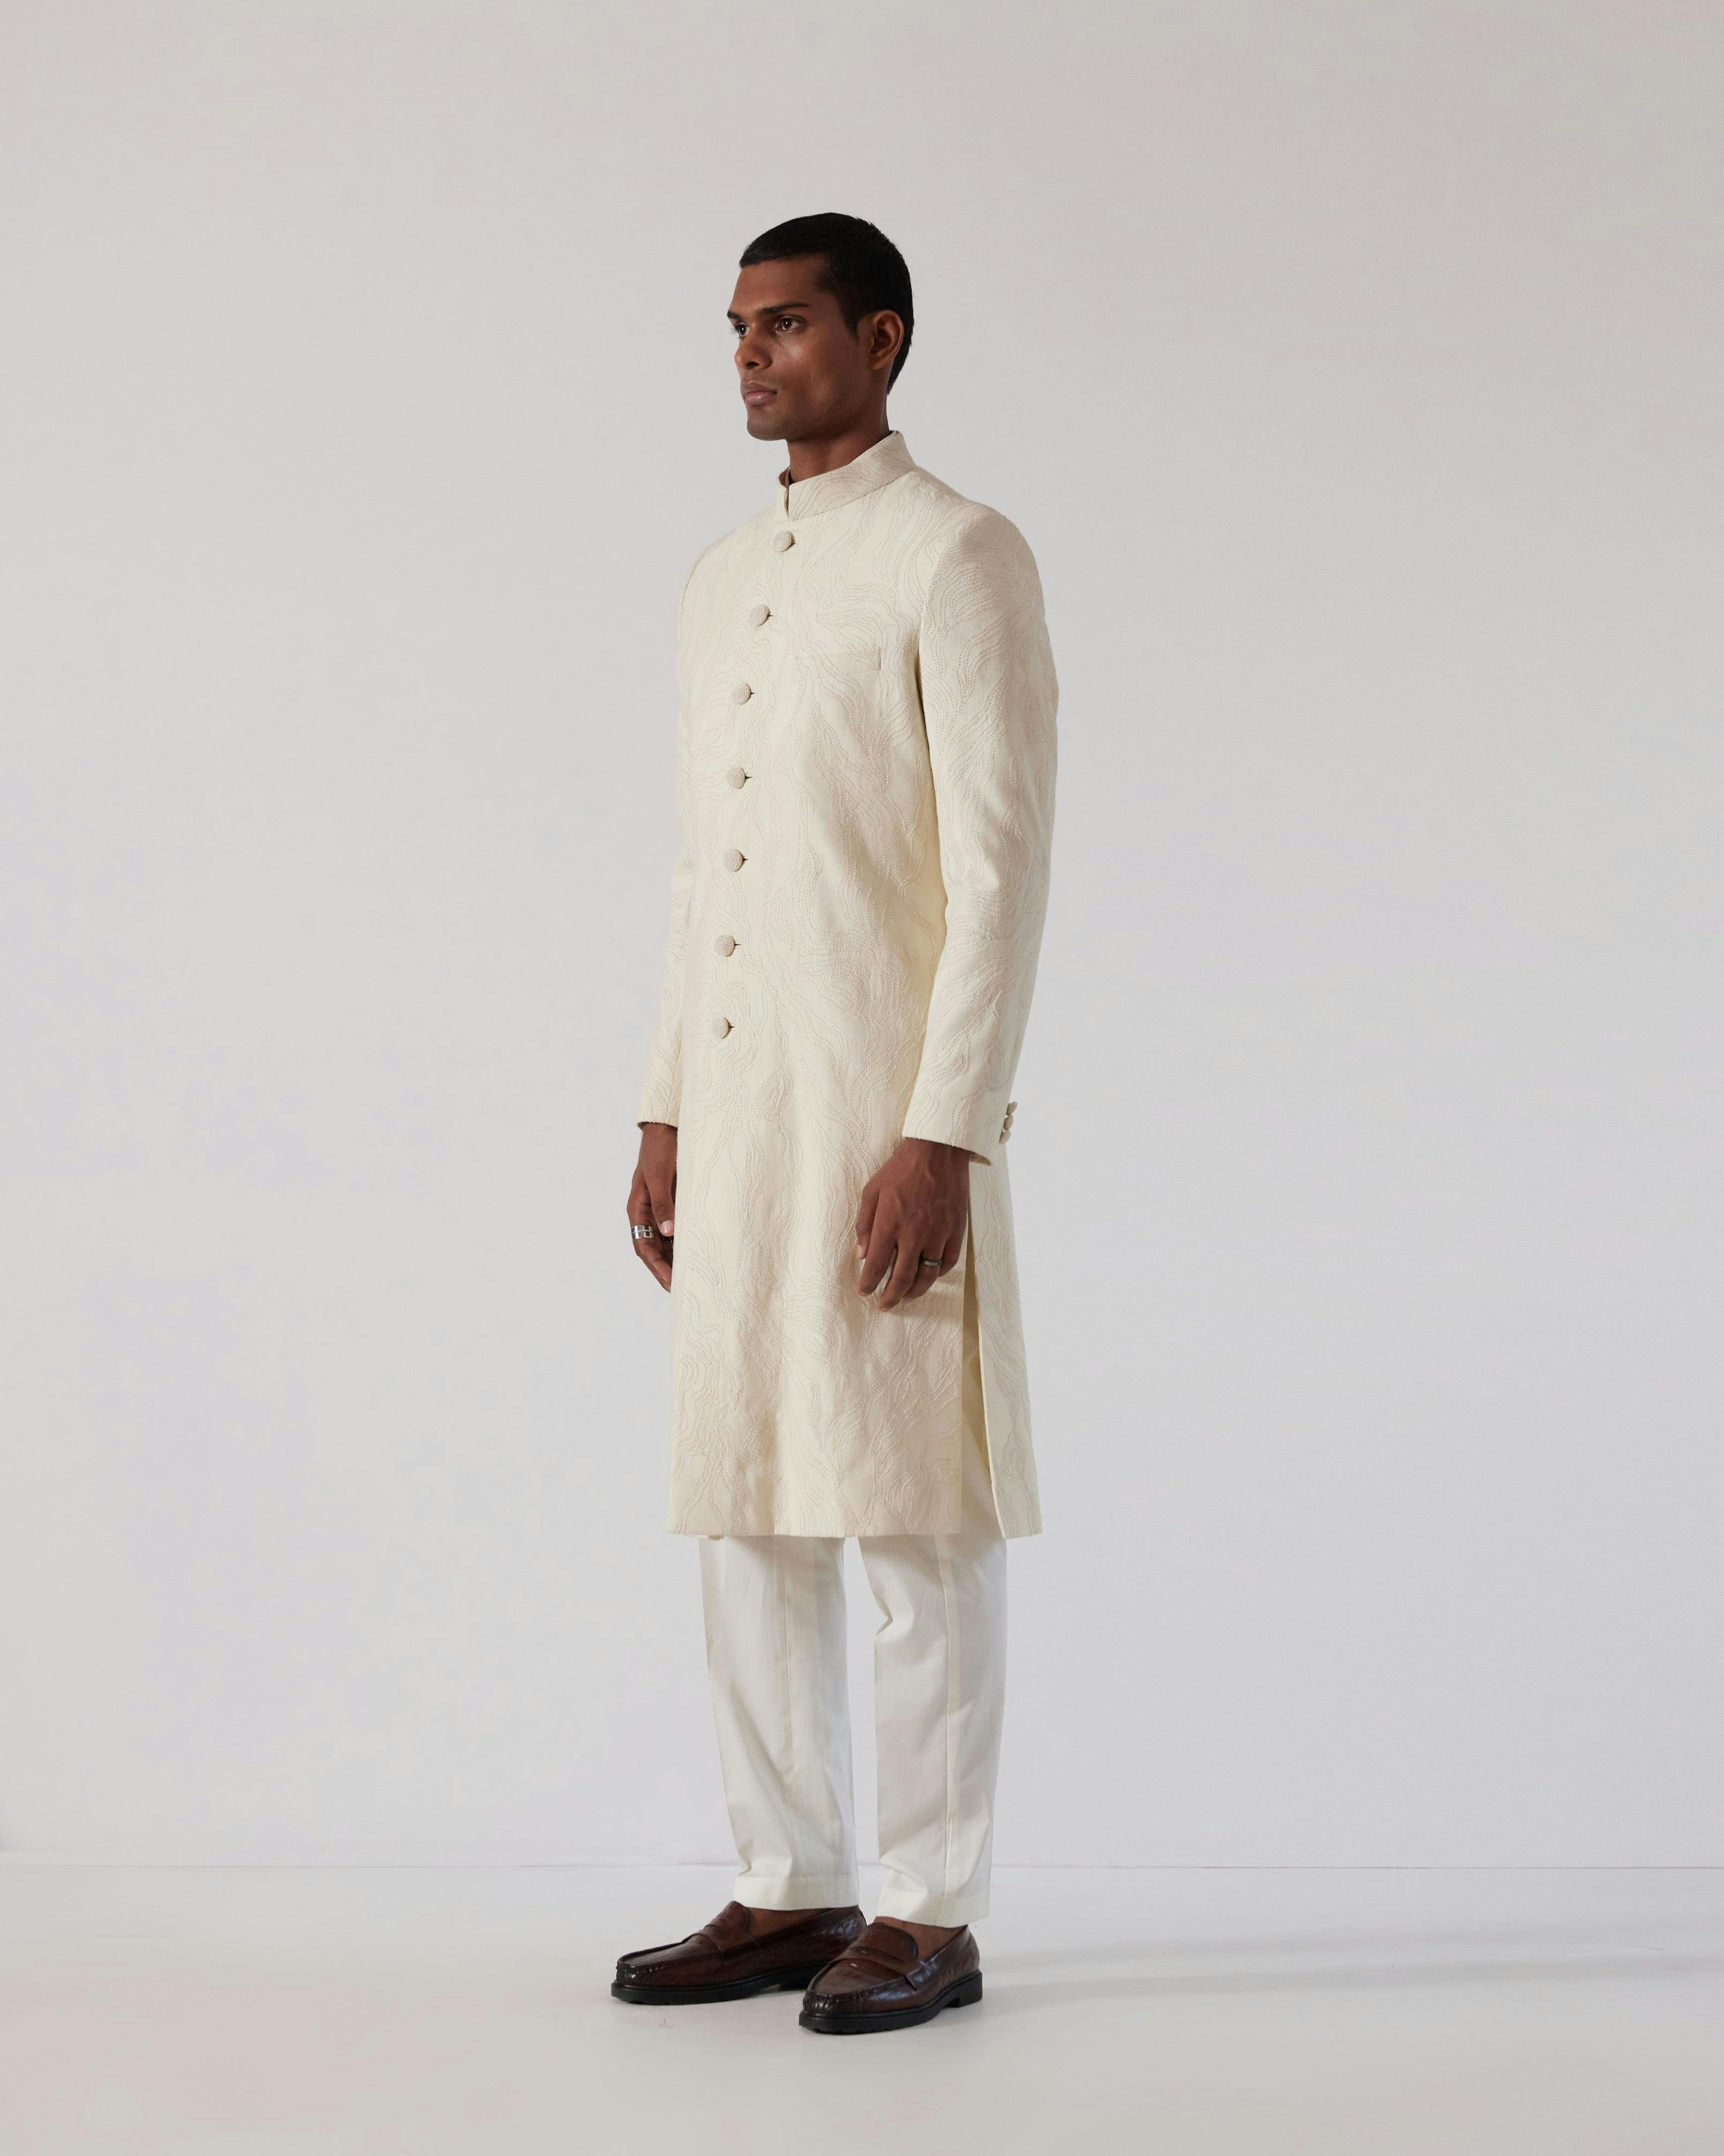 Thumbnail preview #1 for Infinity Embroidered Sherwani